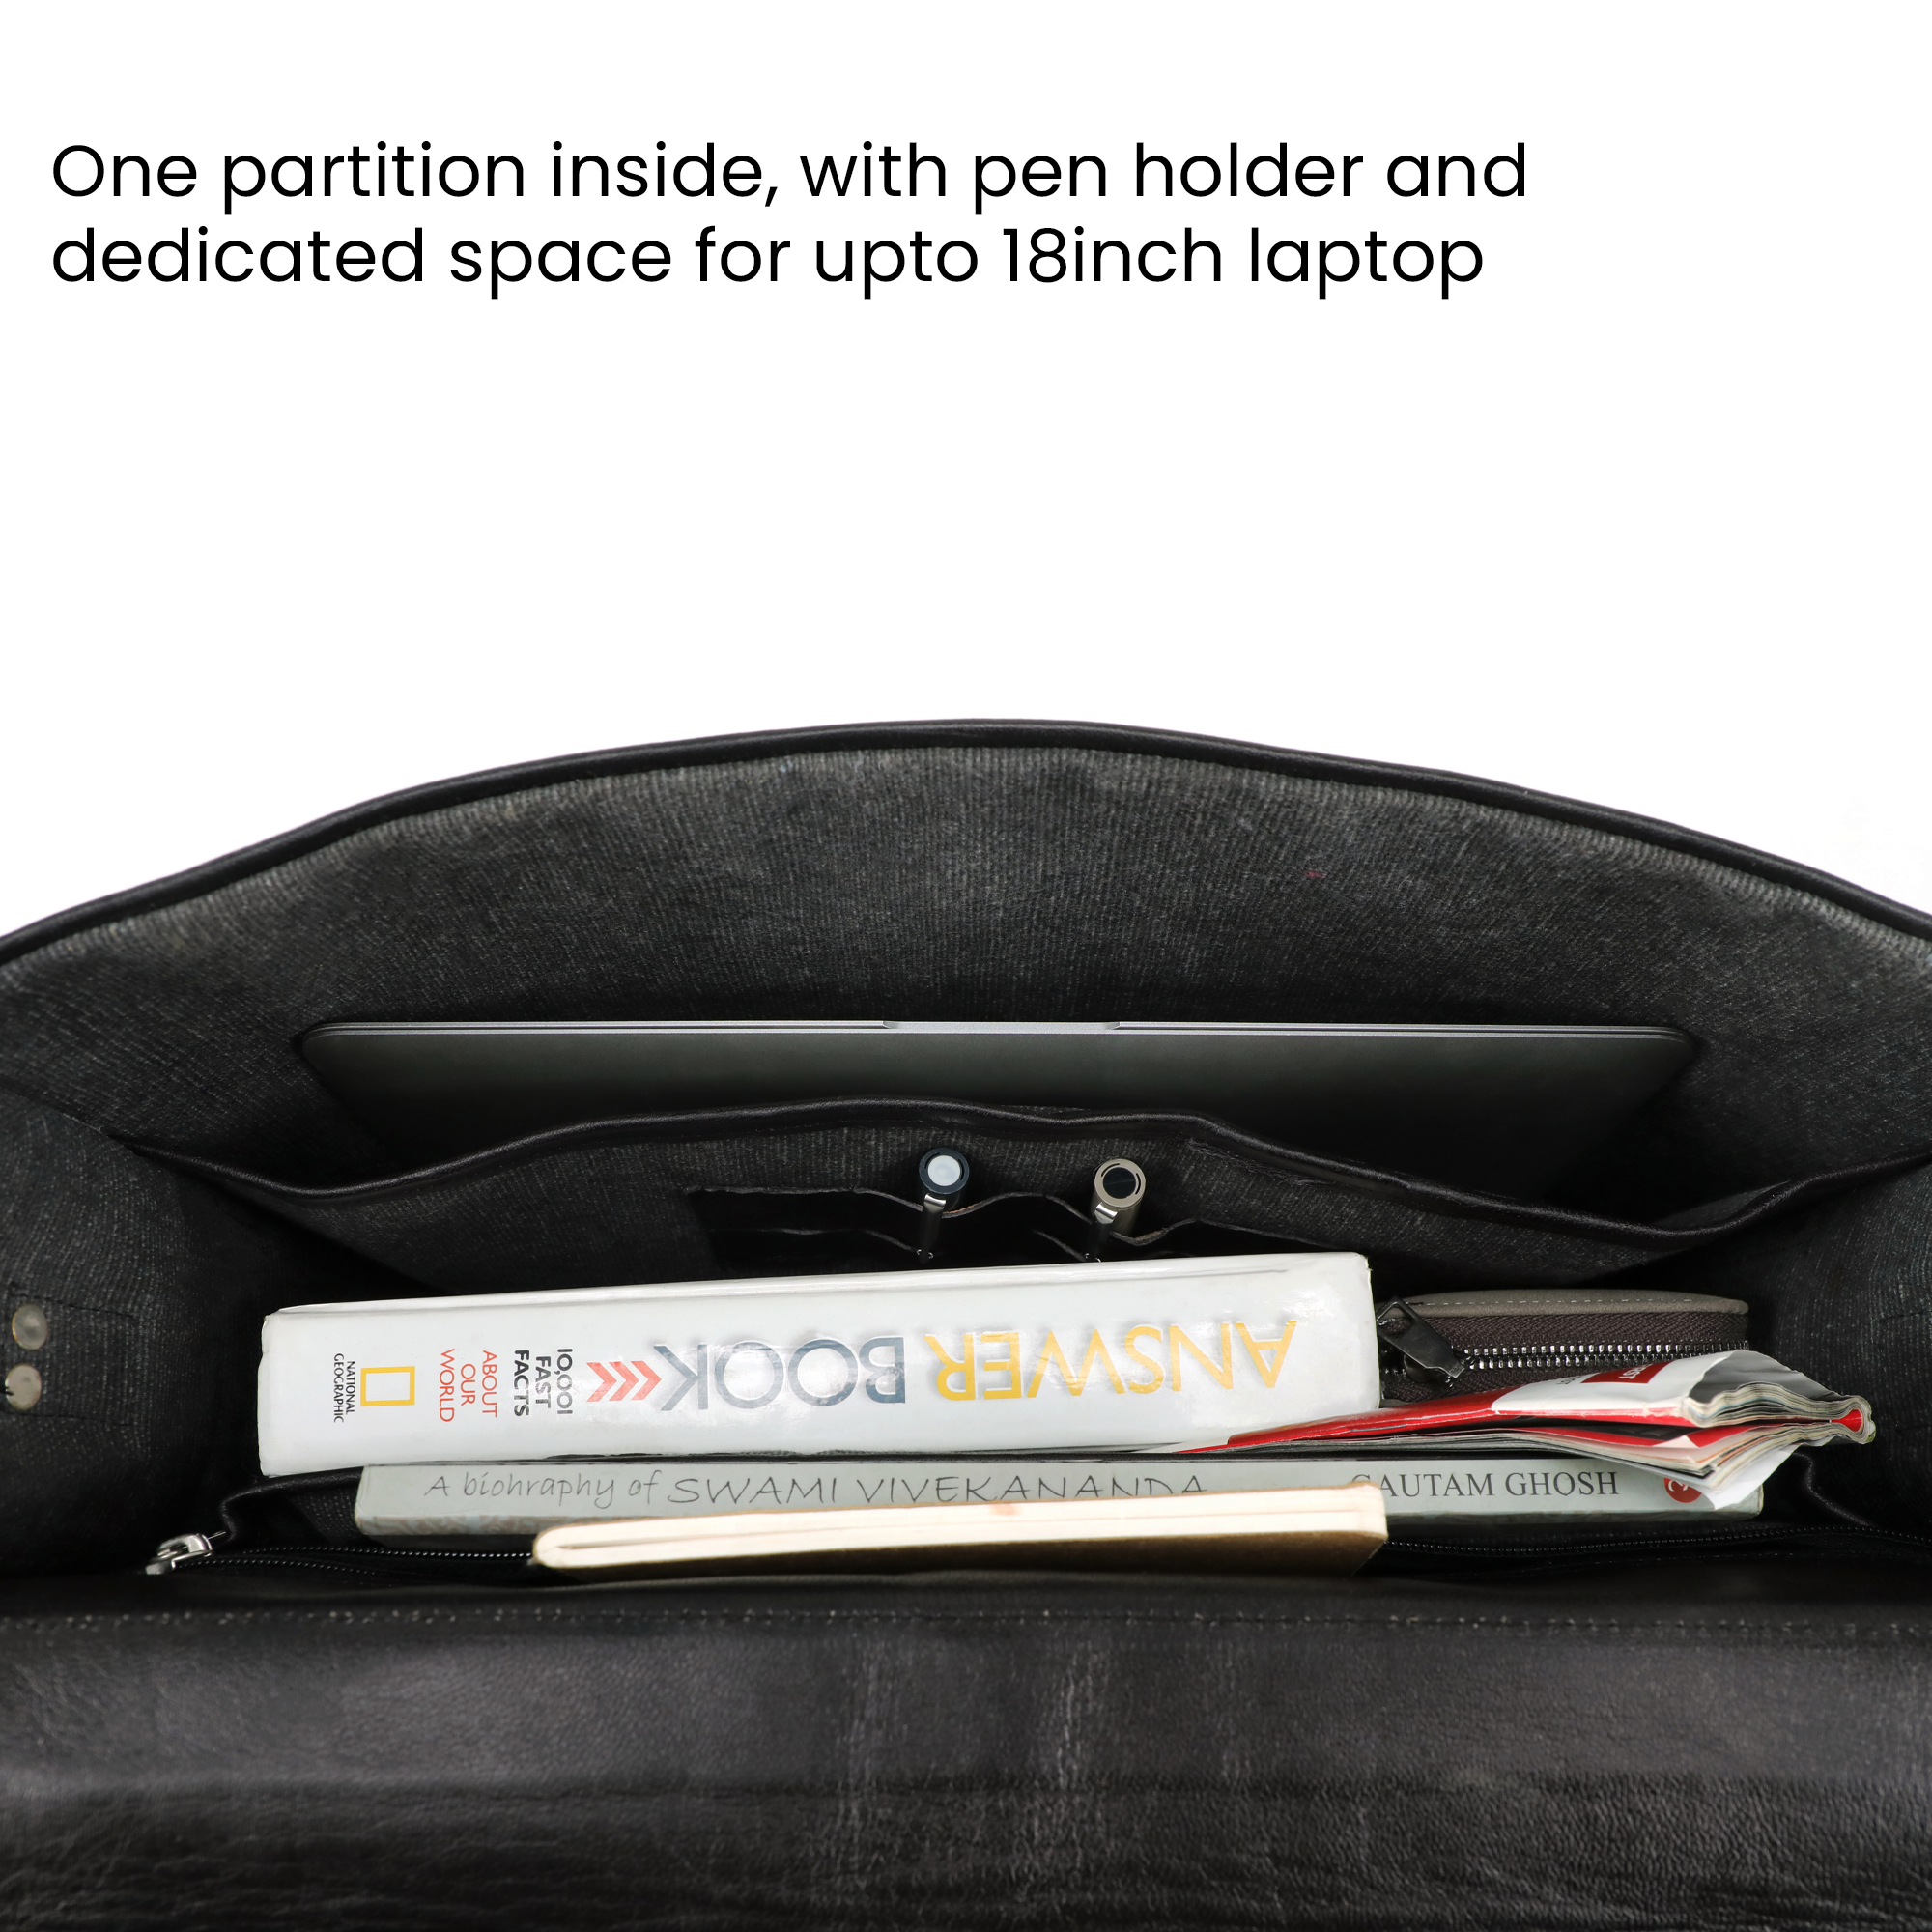 Inside of the black leather bag for men showing dedicated laptop compartment, pen slots, and spacious compartment for books or documents